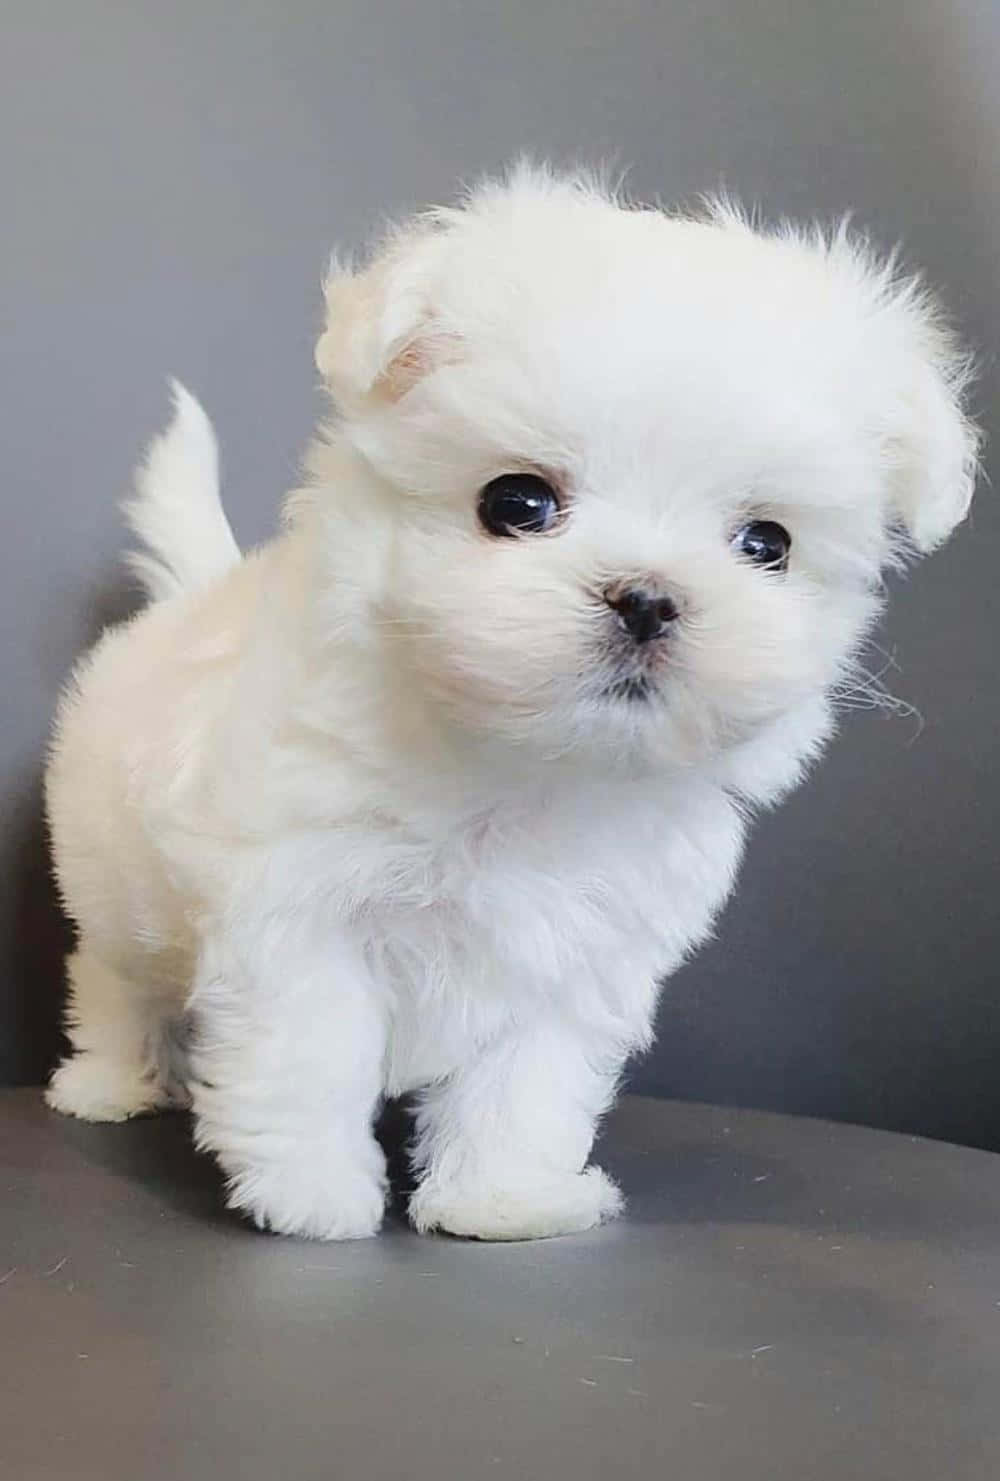 A White Puppy Standing On A Gray Chair